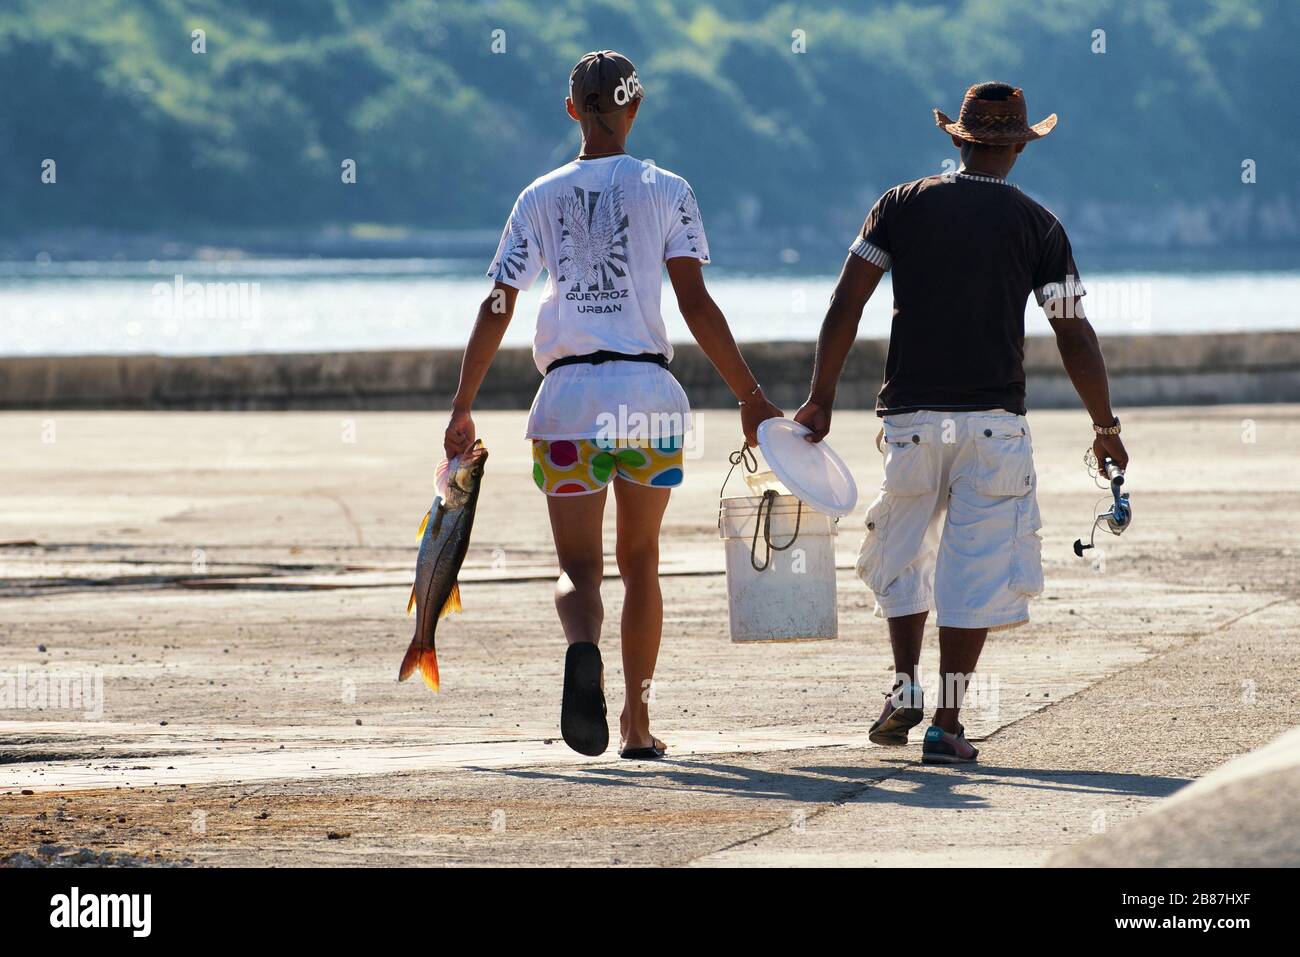 Two fishermen on the Havana waterfront carrying a sea bass fish. Cuban people image. Stock Photo